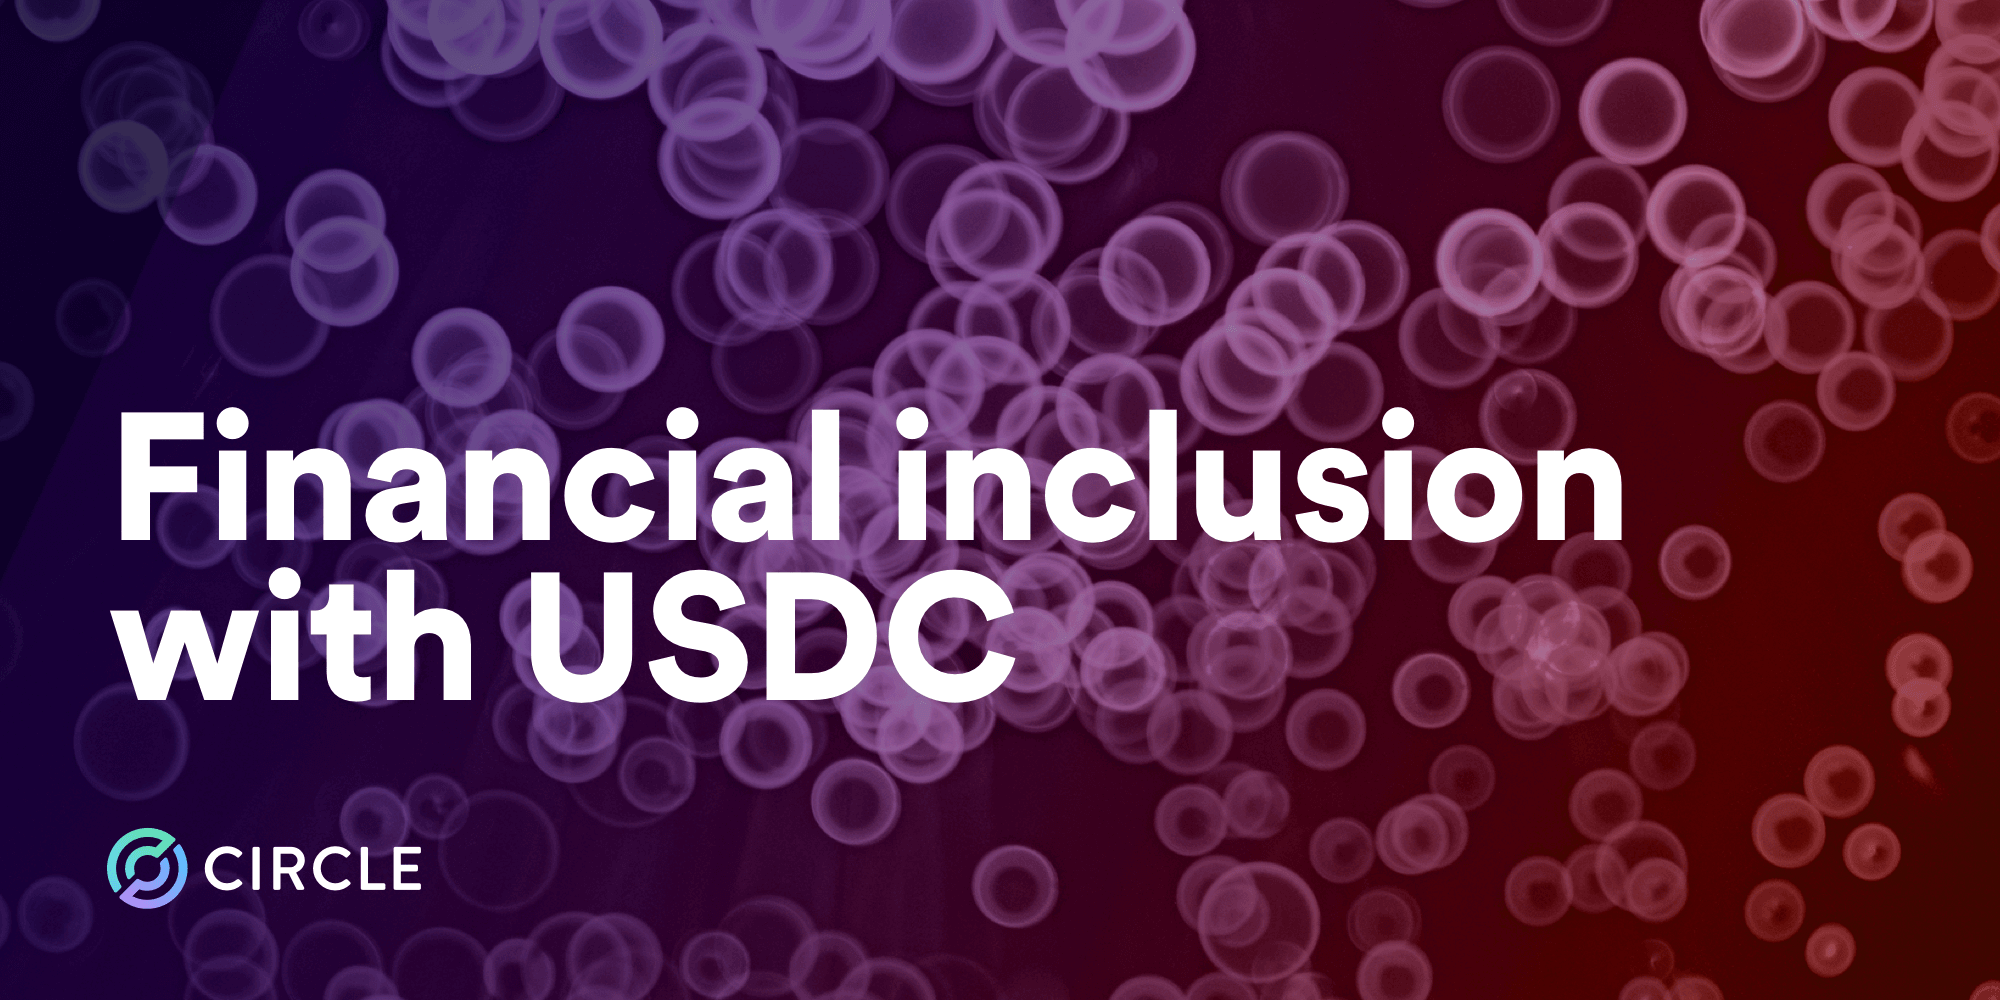 Financial inclusion with USDC